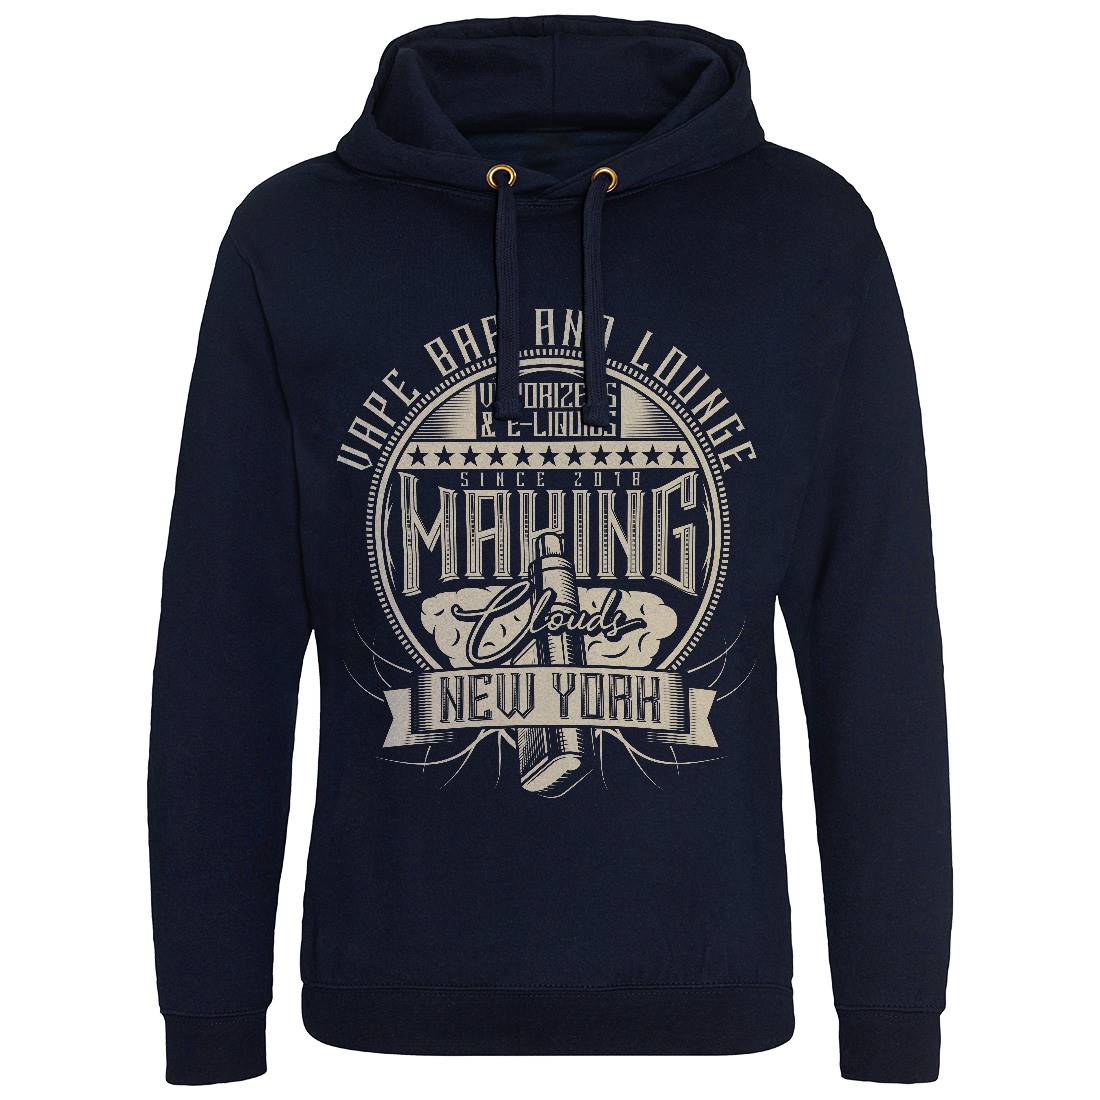 Vapeland Mens Hoodie Without Pocket Drugs A398